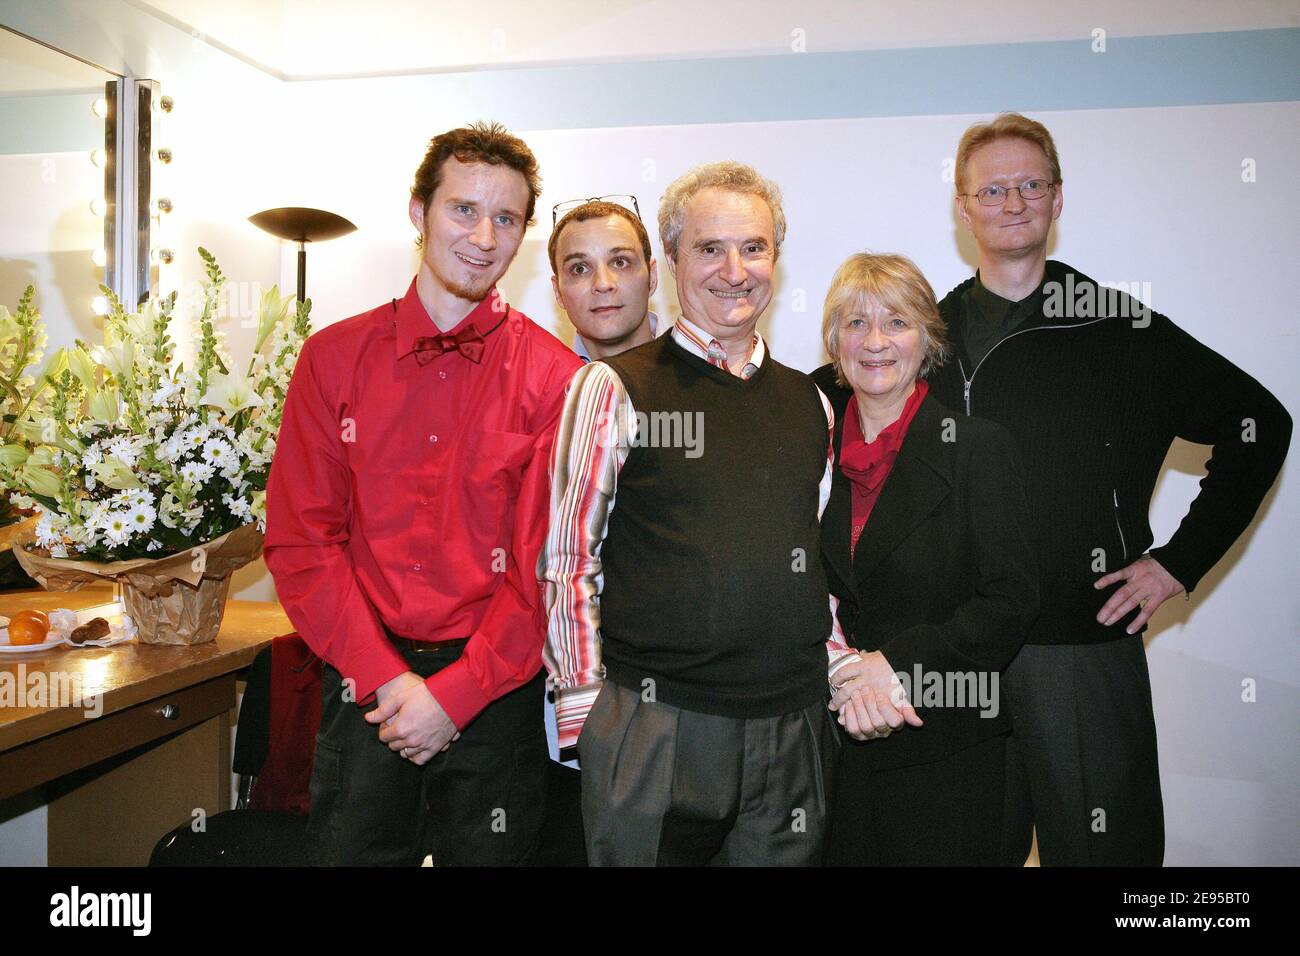 French humorist Daniel Prevost poses backstage with his 3 sons and his wife after his last show at the Olympia in Paris, France on january 16, 2006. Photo by Thierry Orban/ABACAPRESS.COM Stock Photo